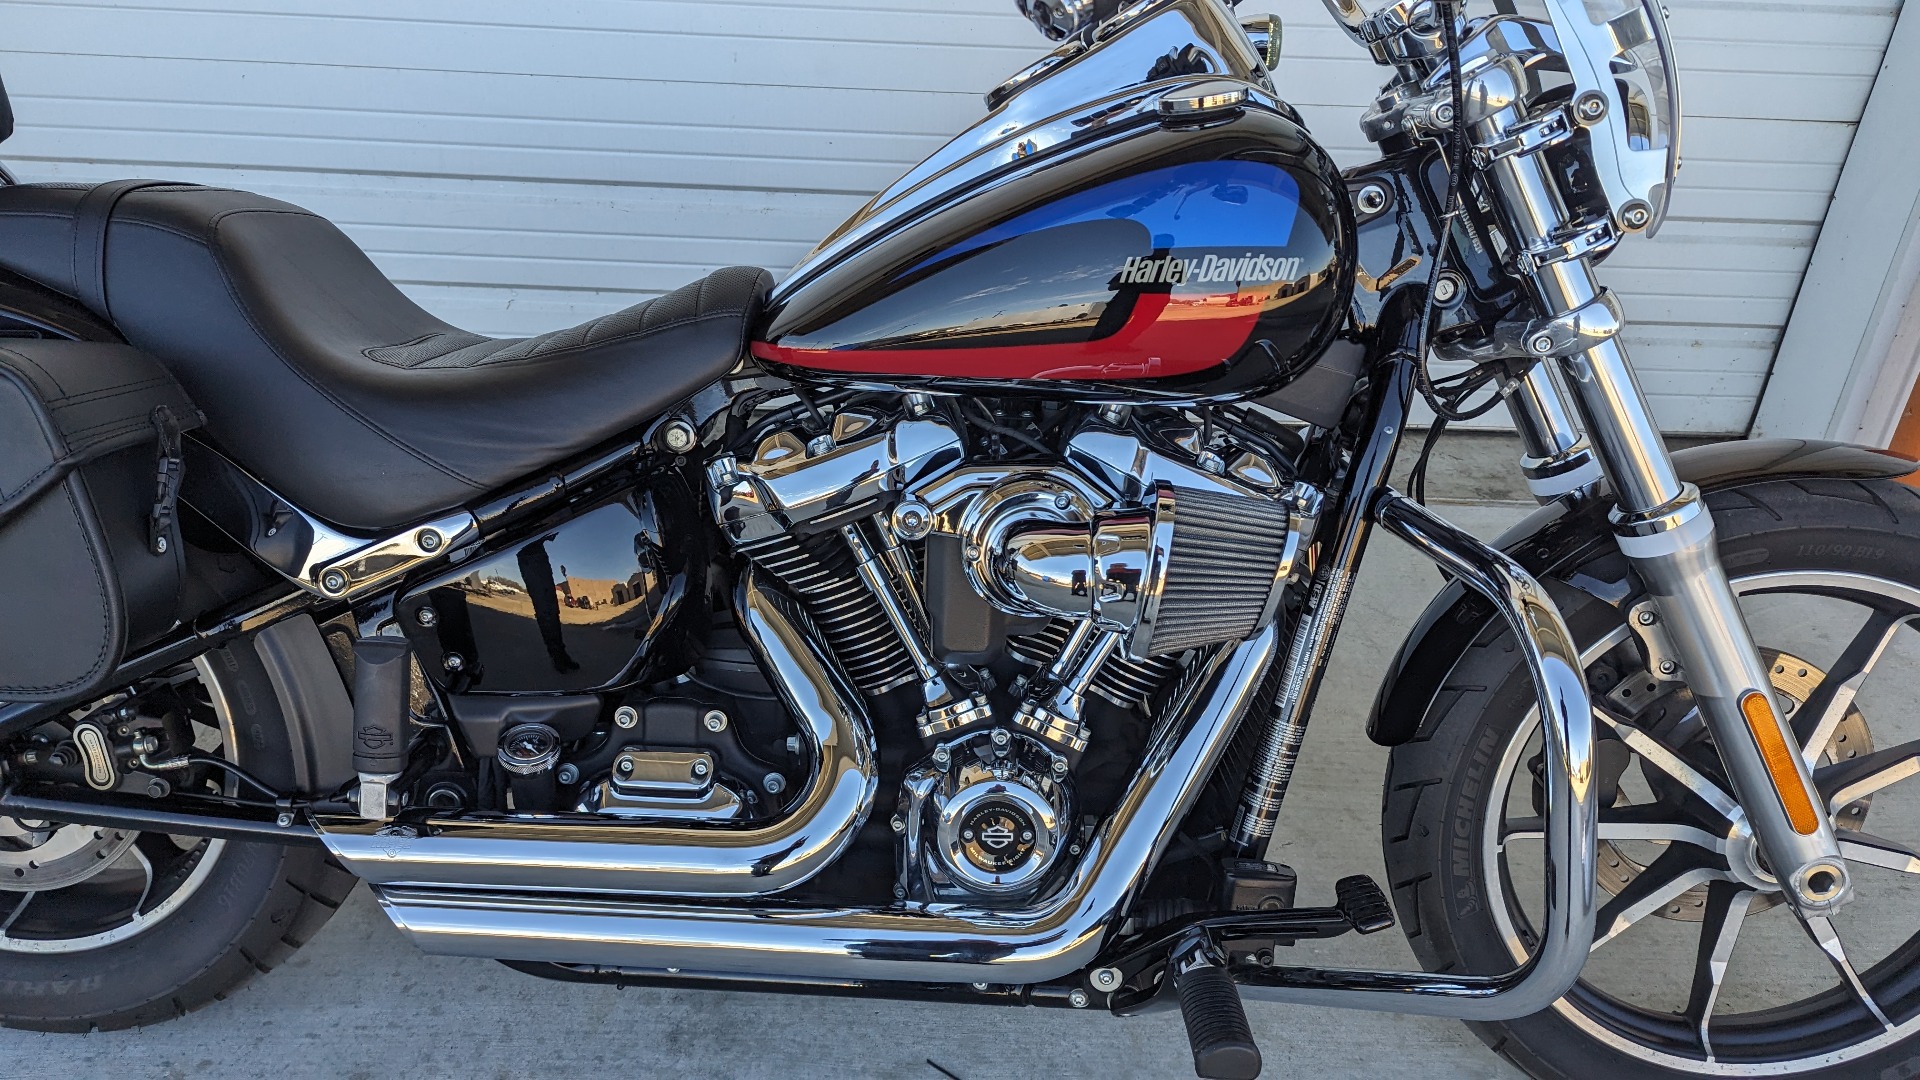 2018 harley davidson low rider 107 for sale in jackson - Photo 4